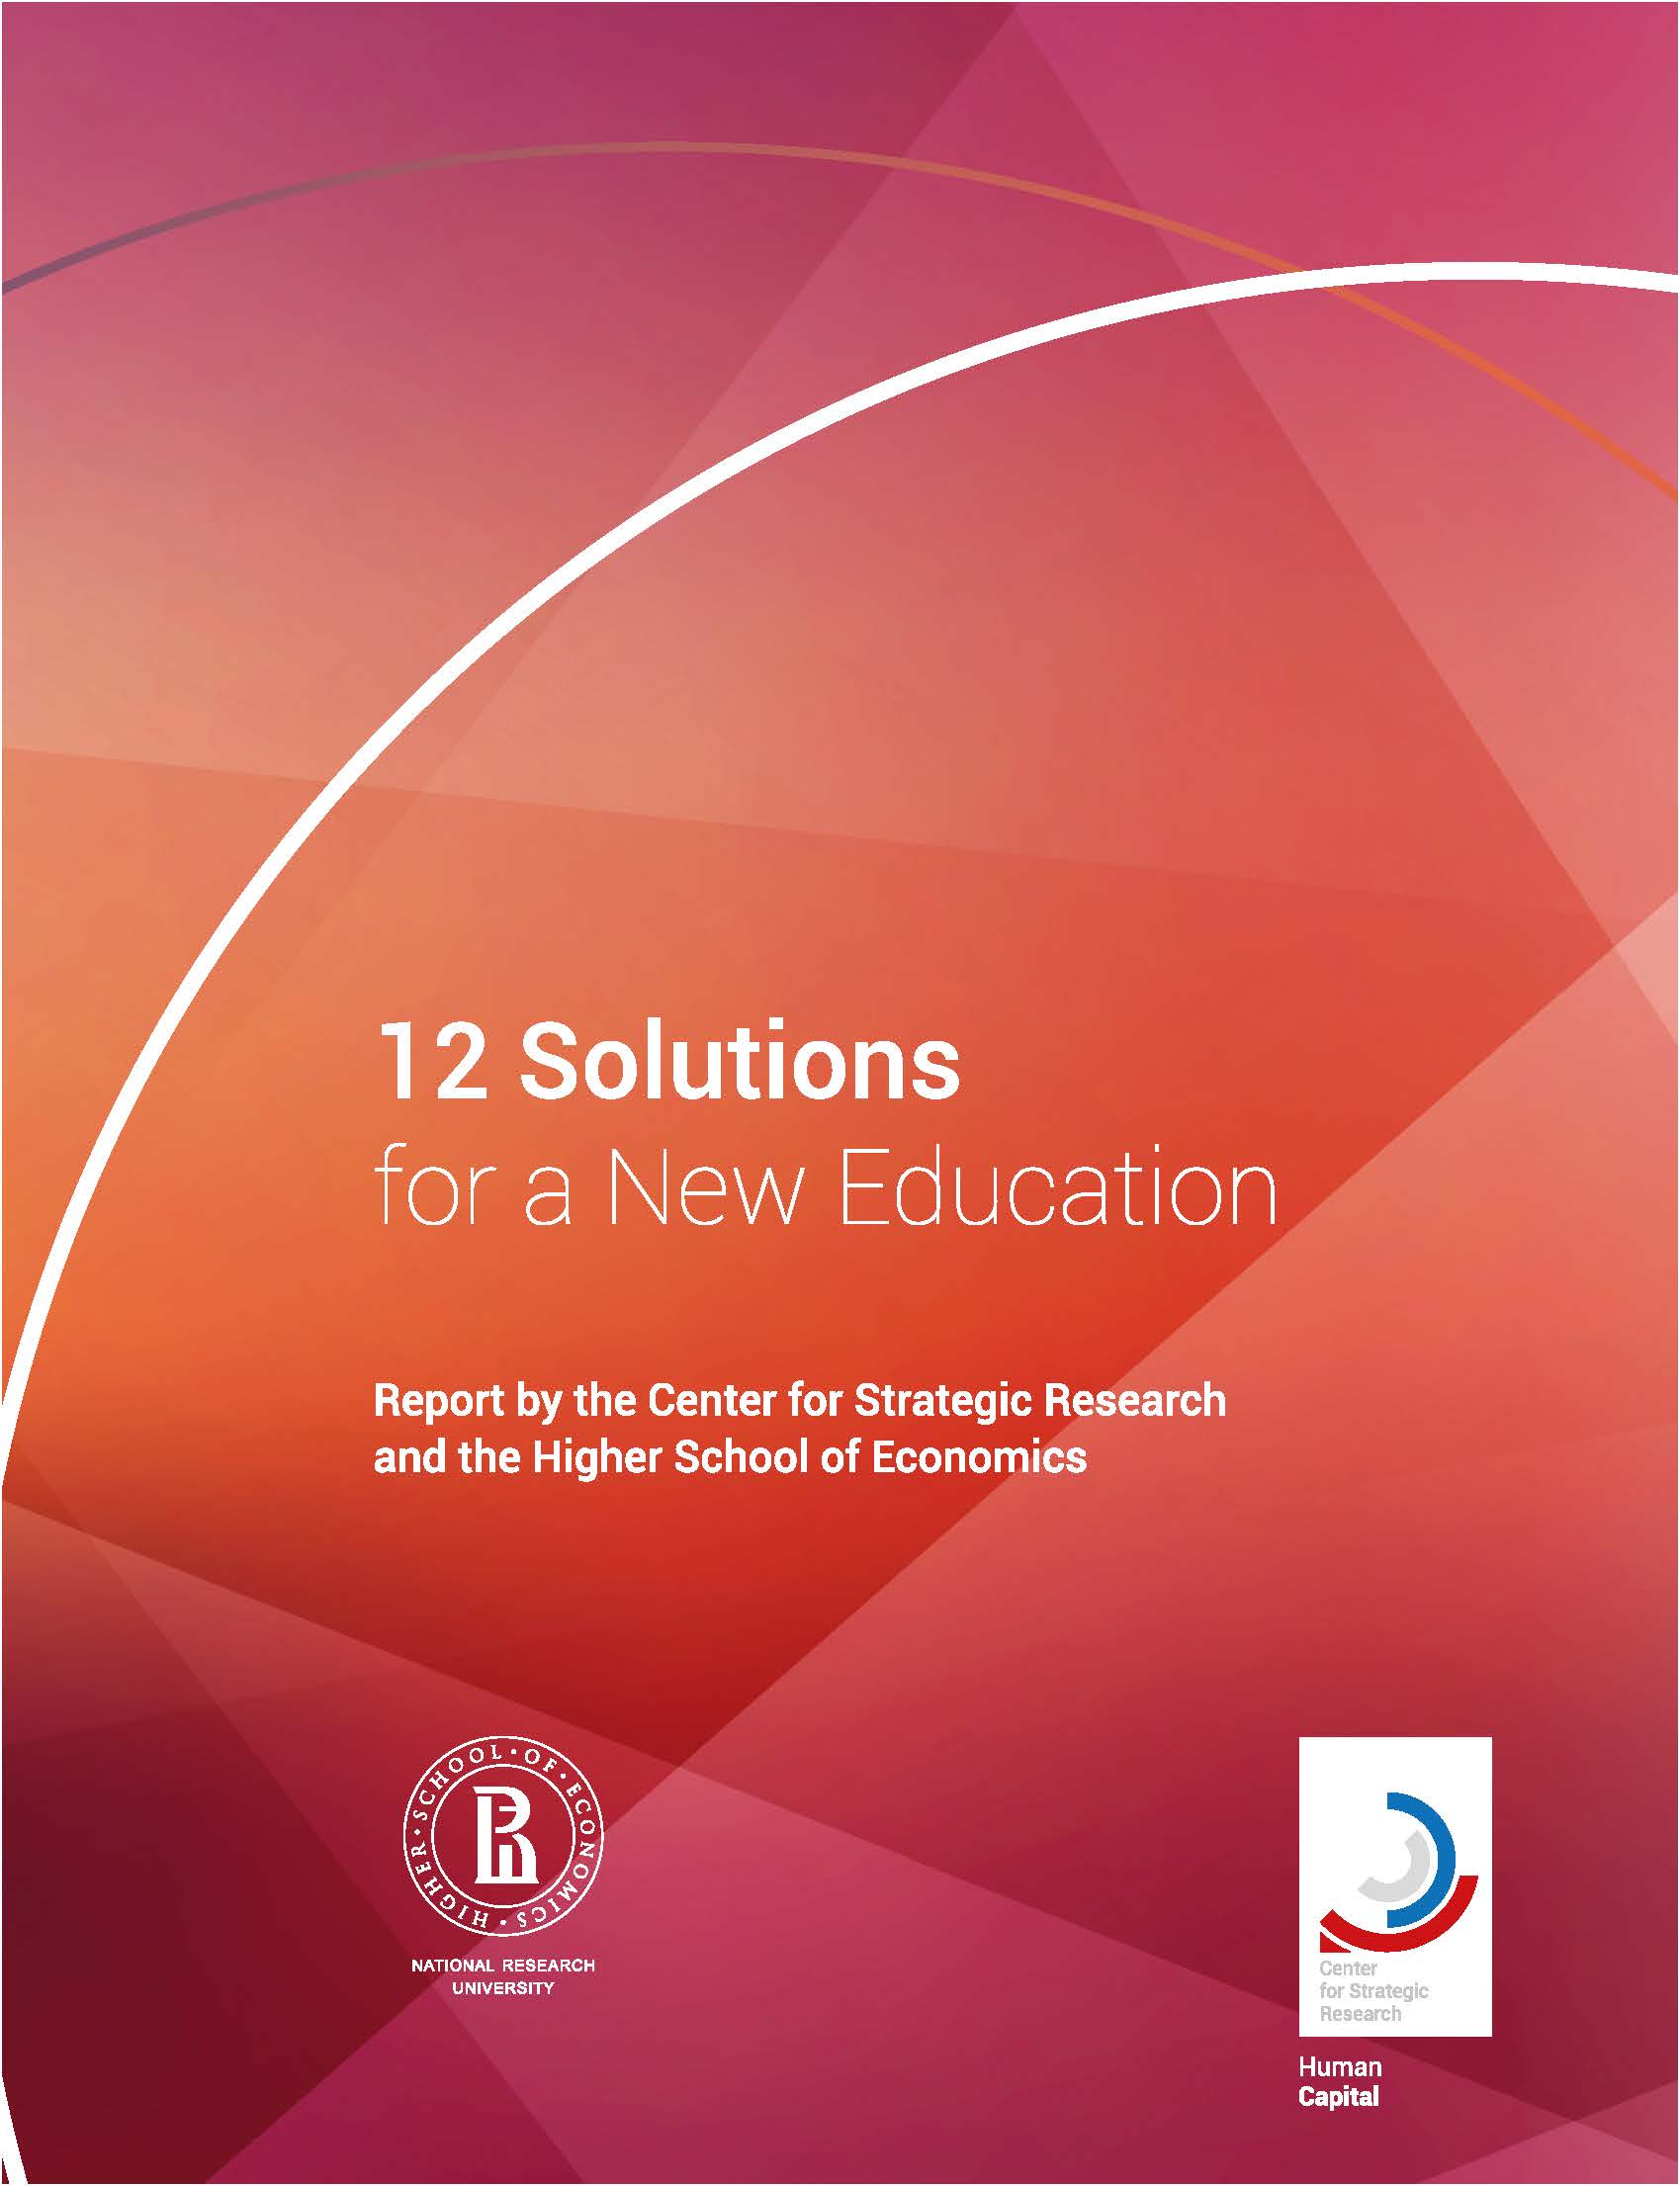 12 Solutions for a New Education: Report by the Center for Strategic Research and the Higher School of Economics